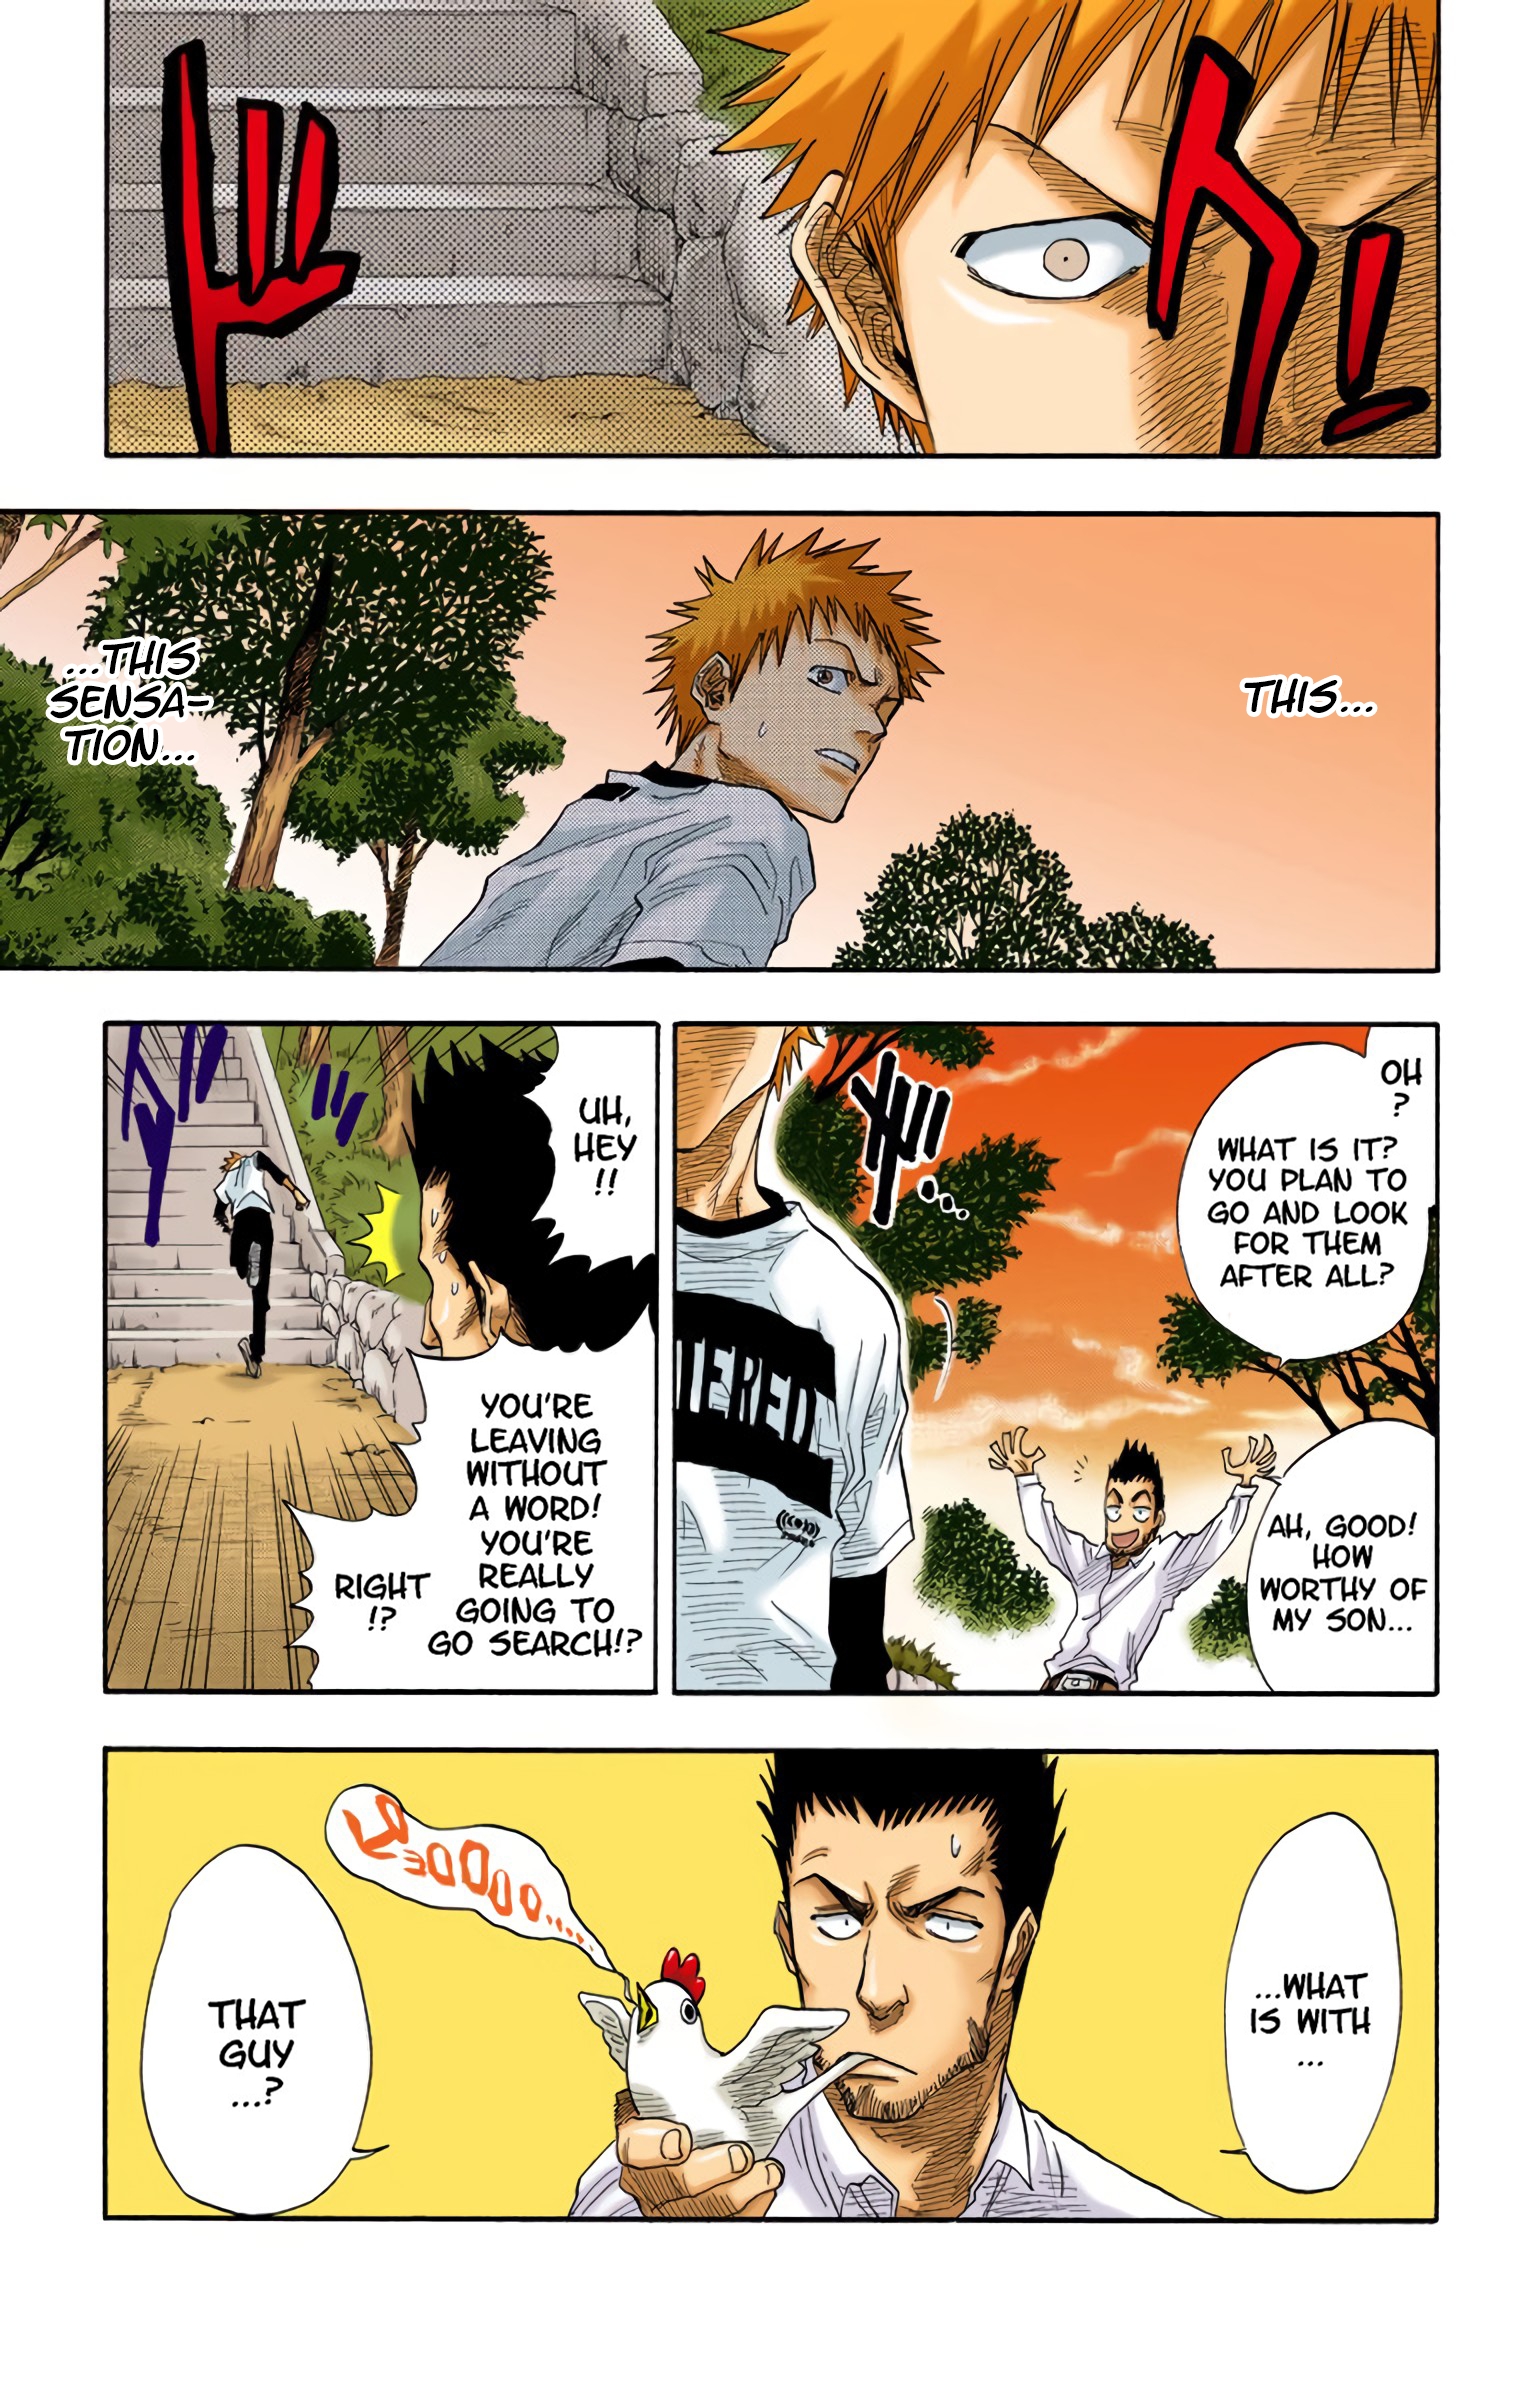 Bleach - Digital Colored Comics Vol.3 Chapter 20: 6/17 Op. 4 A Face From The Past - Picture 3